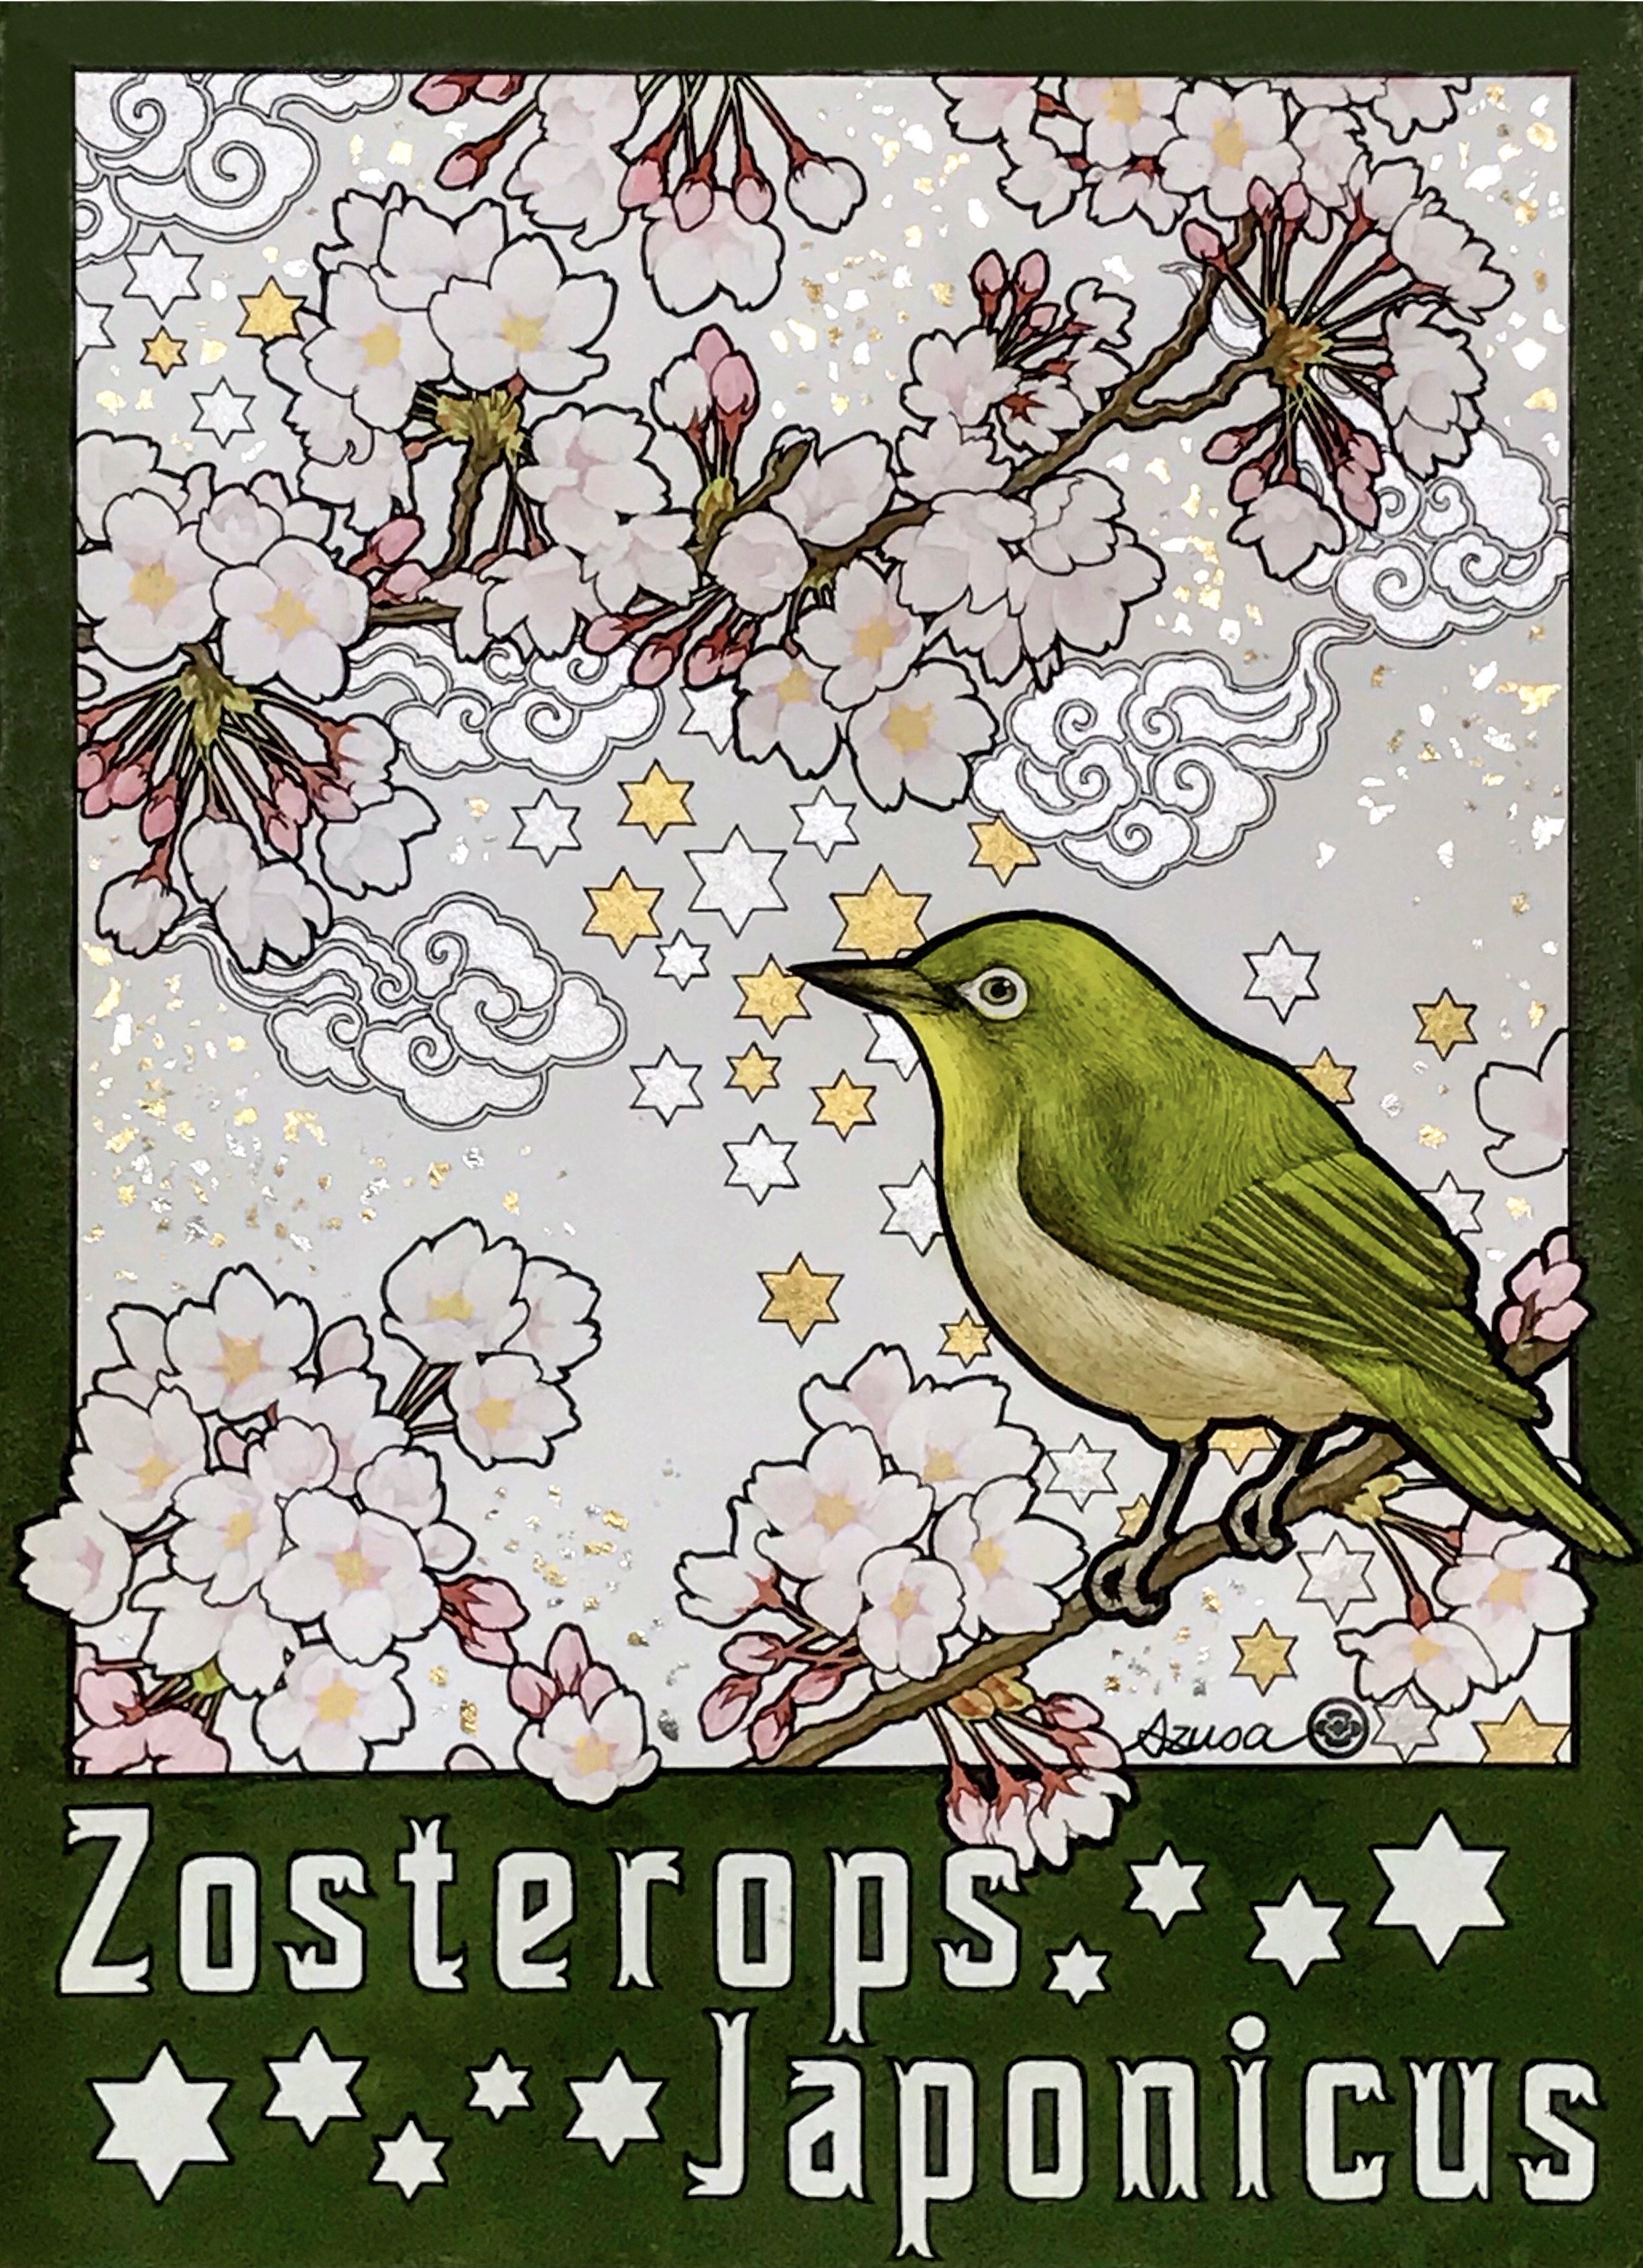 Cherry blossoms and a white-eye bird